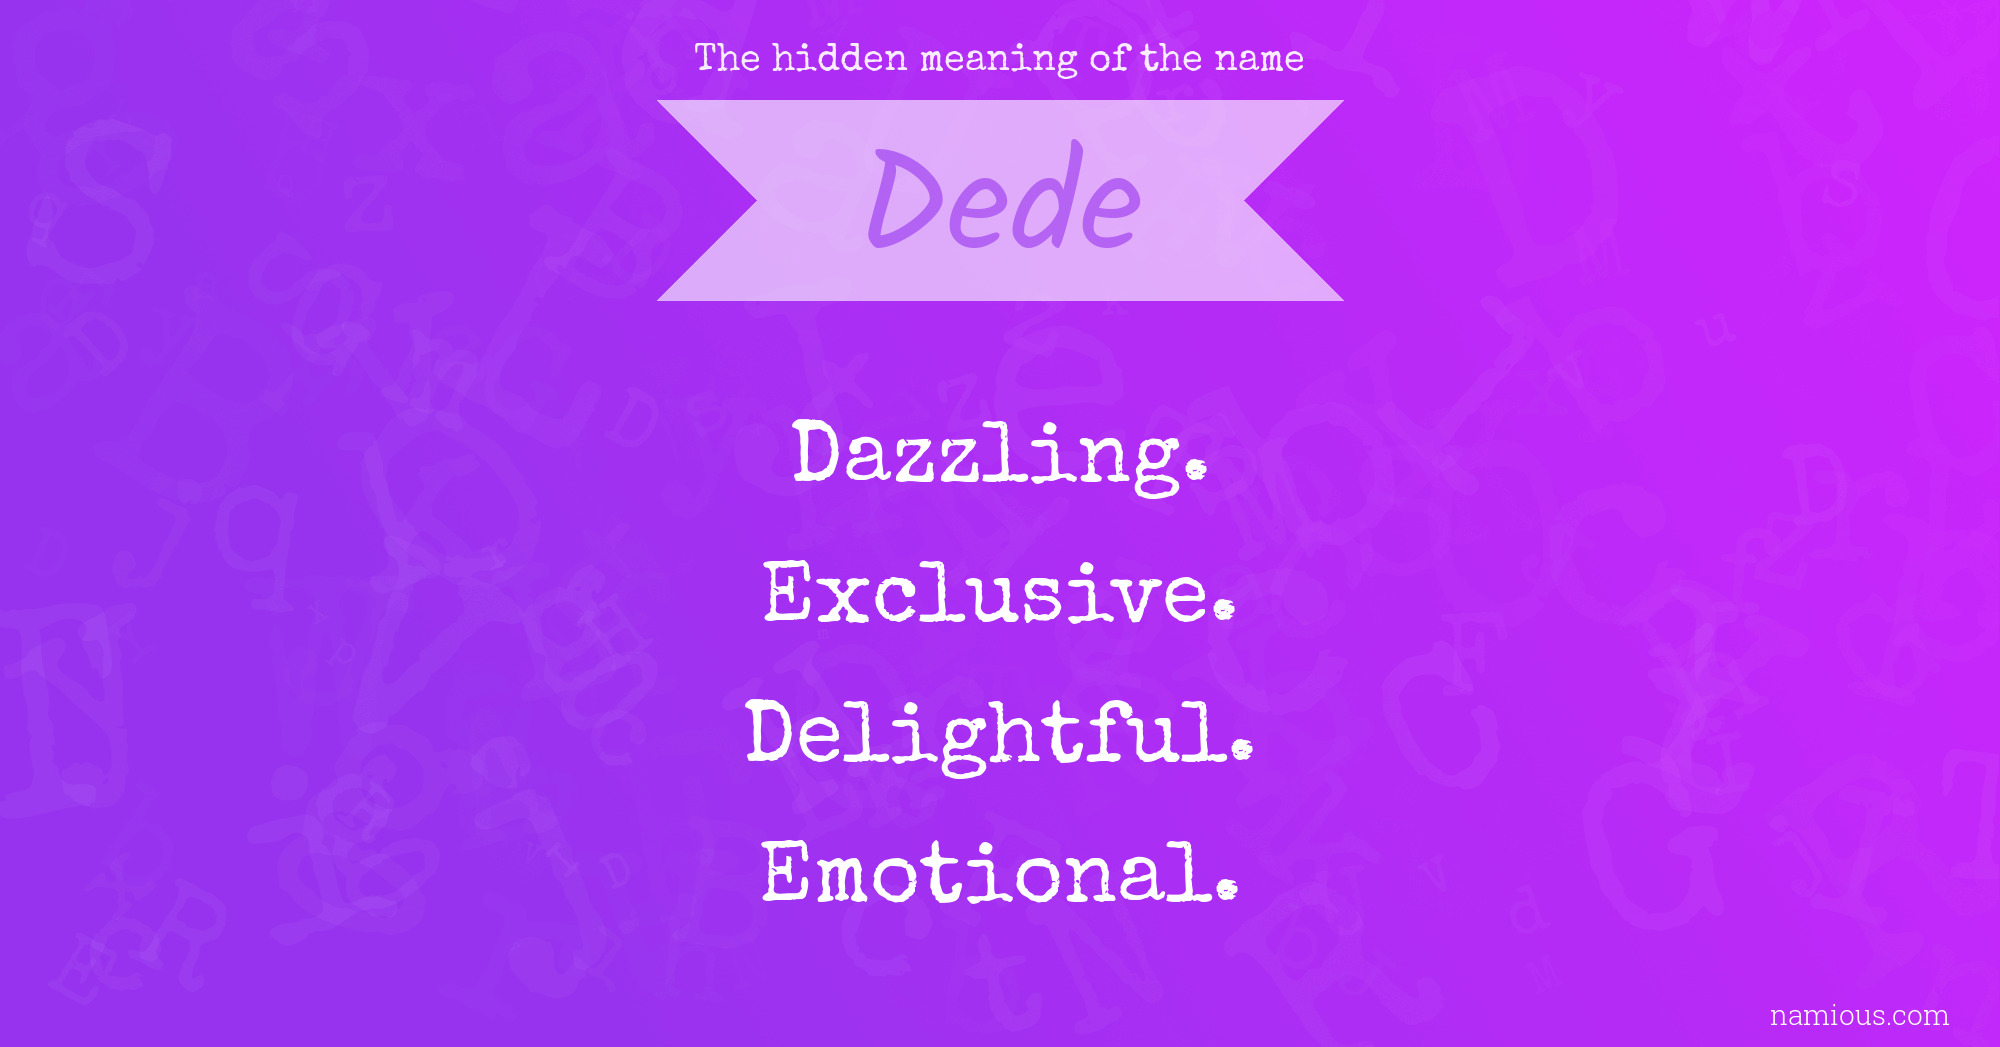 The hidden meaning of the name Dede